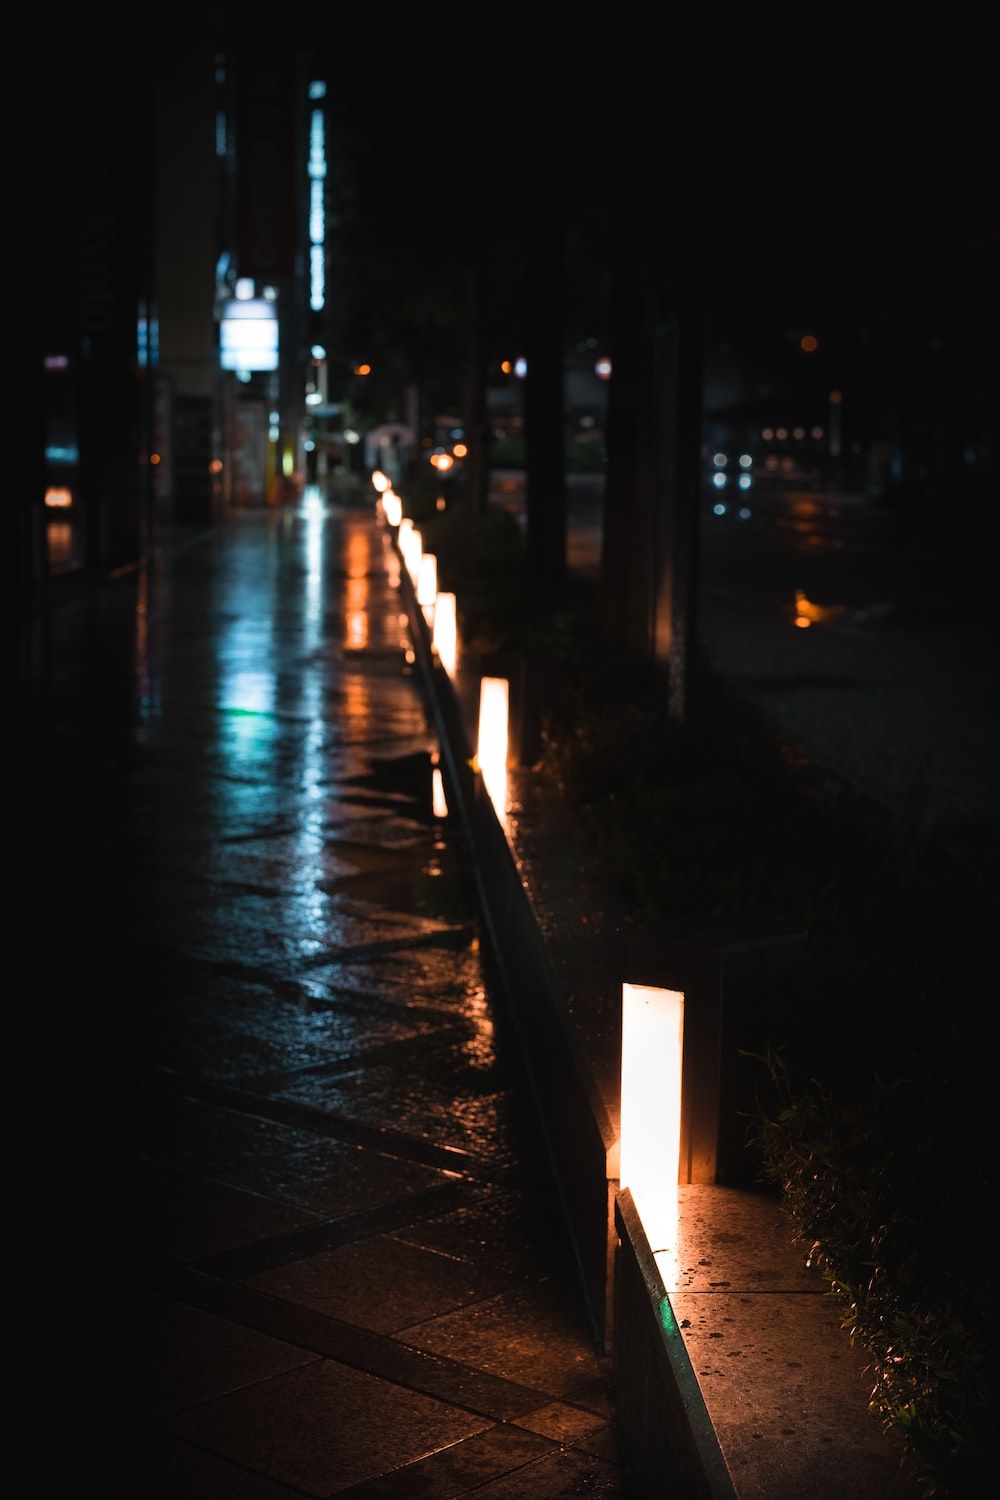 Aesthetic Night Picture. Download Free Image